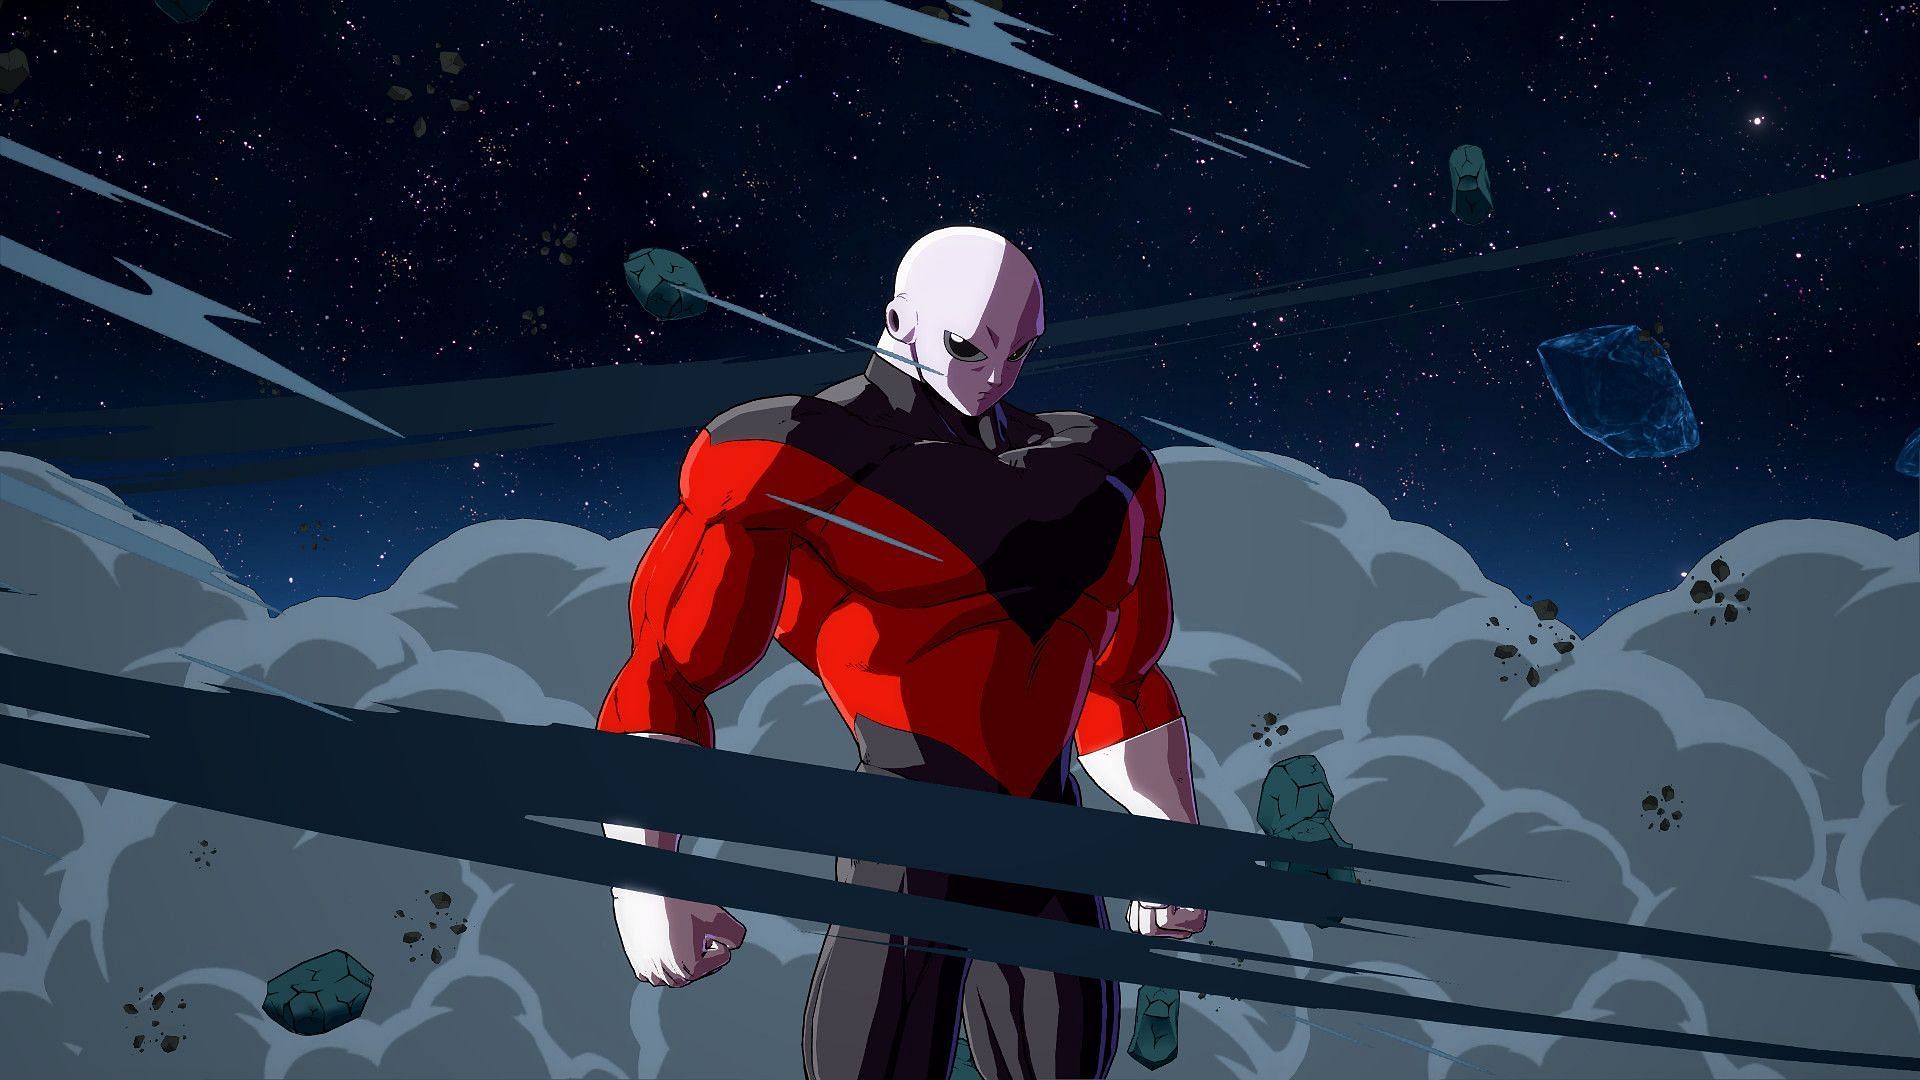 Jiren is a villain that can surpass Goku (Image by Arc System Works)